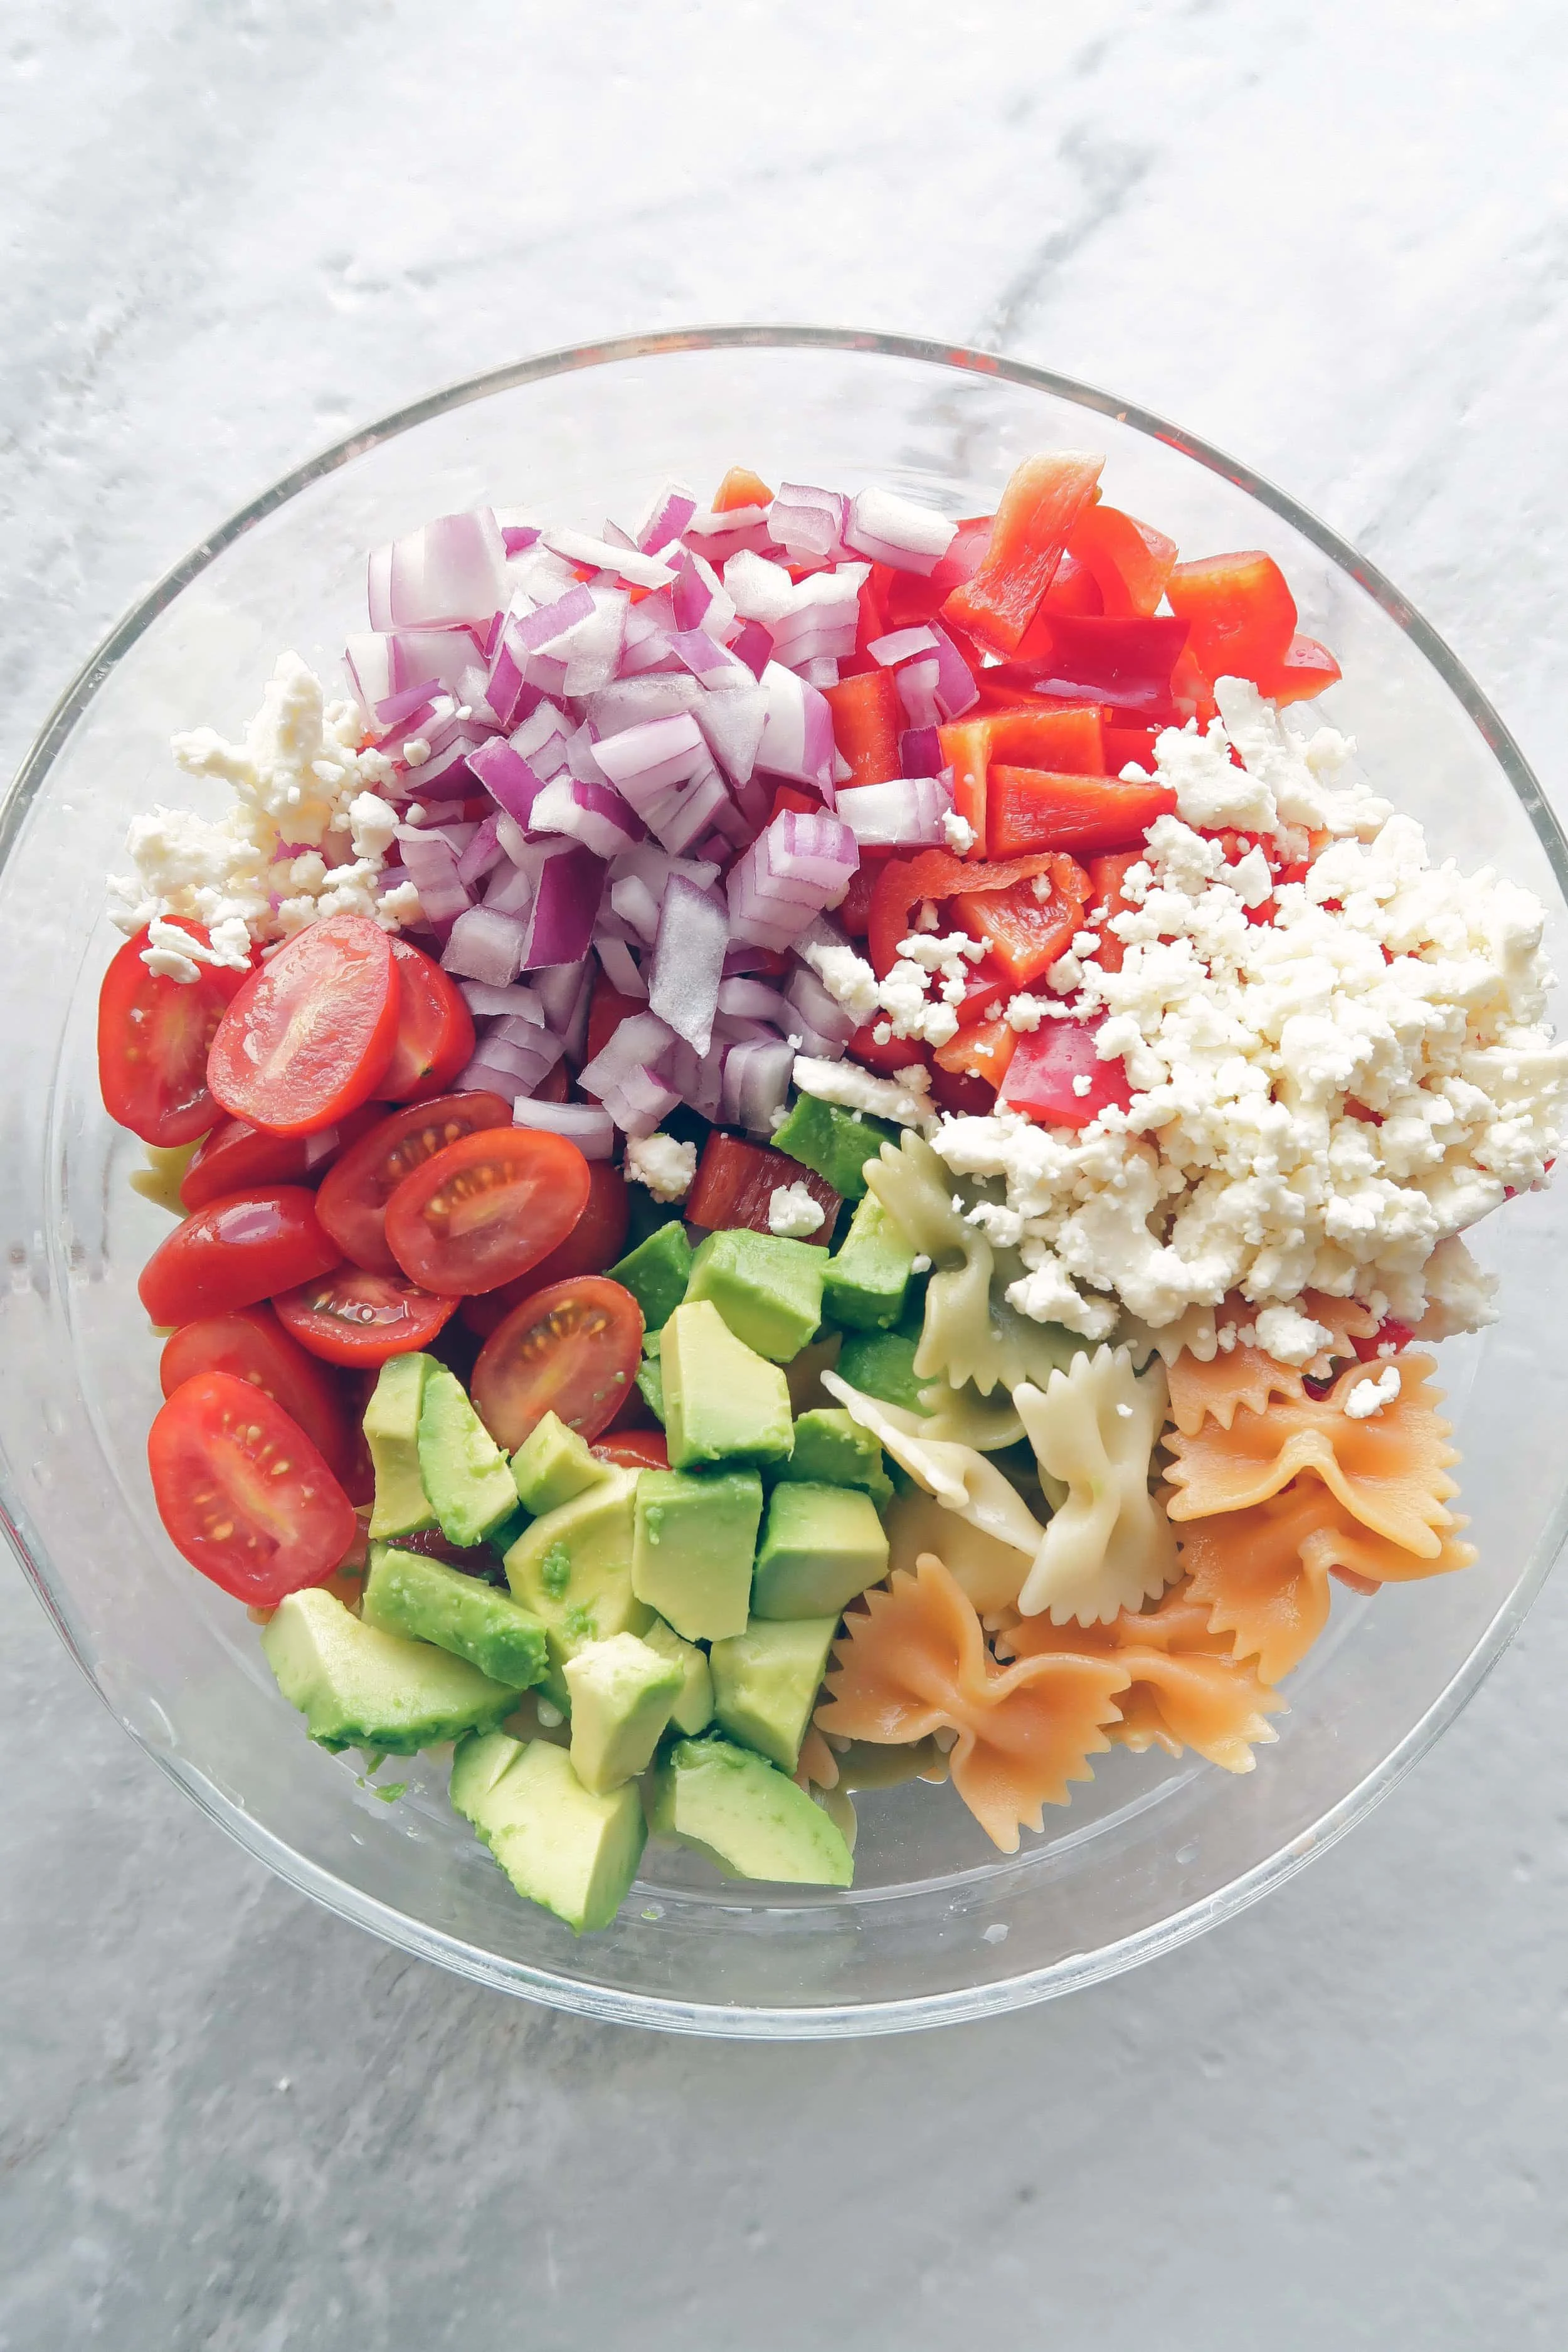 Chopped avocado, tomatoes, red onions, bell pepper, feta, and farfalle pasta in a large bowl.